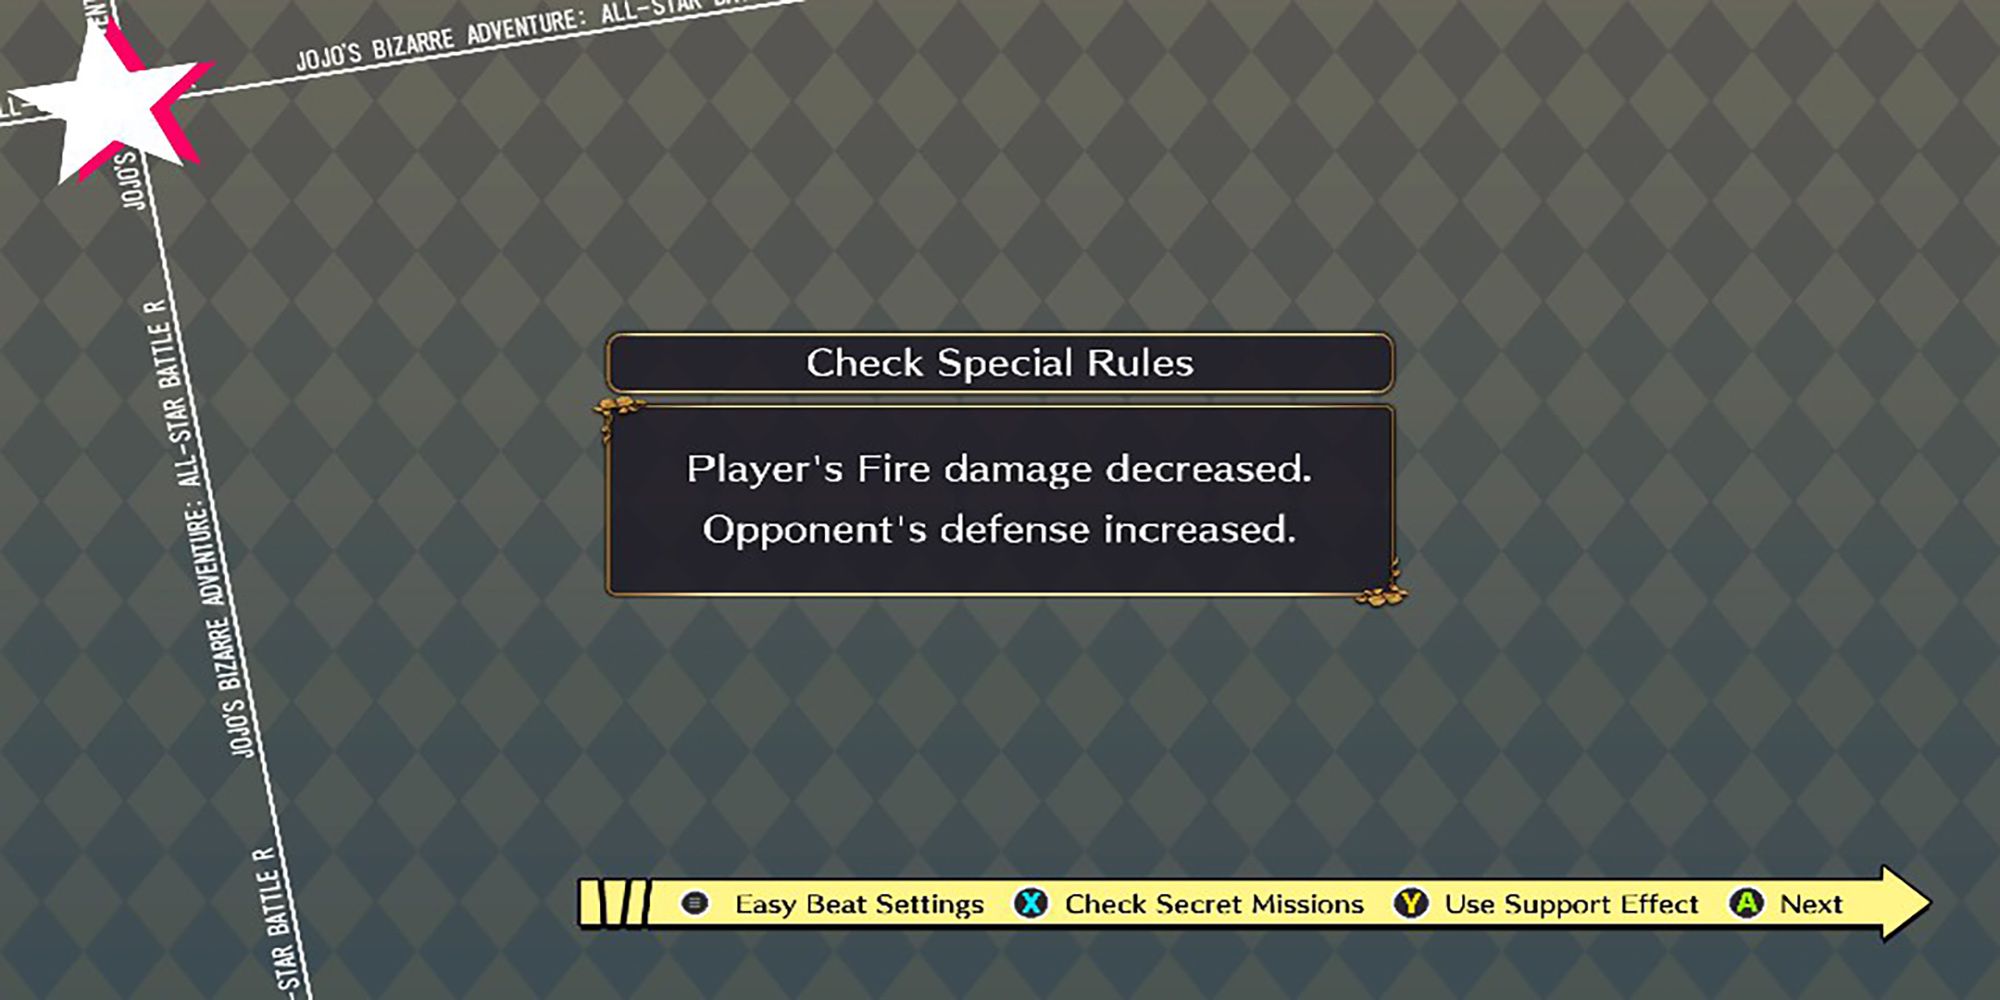 Special rules are always reviewed before the beginning of a match in Jojo's Bizarre Adventure: ASBR.